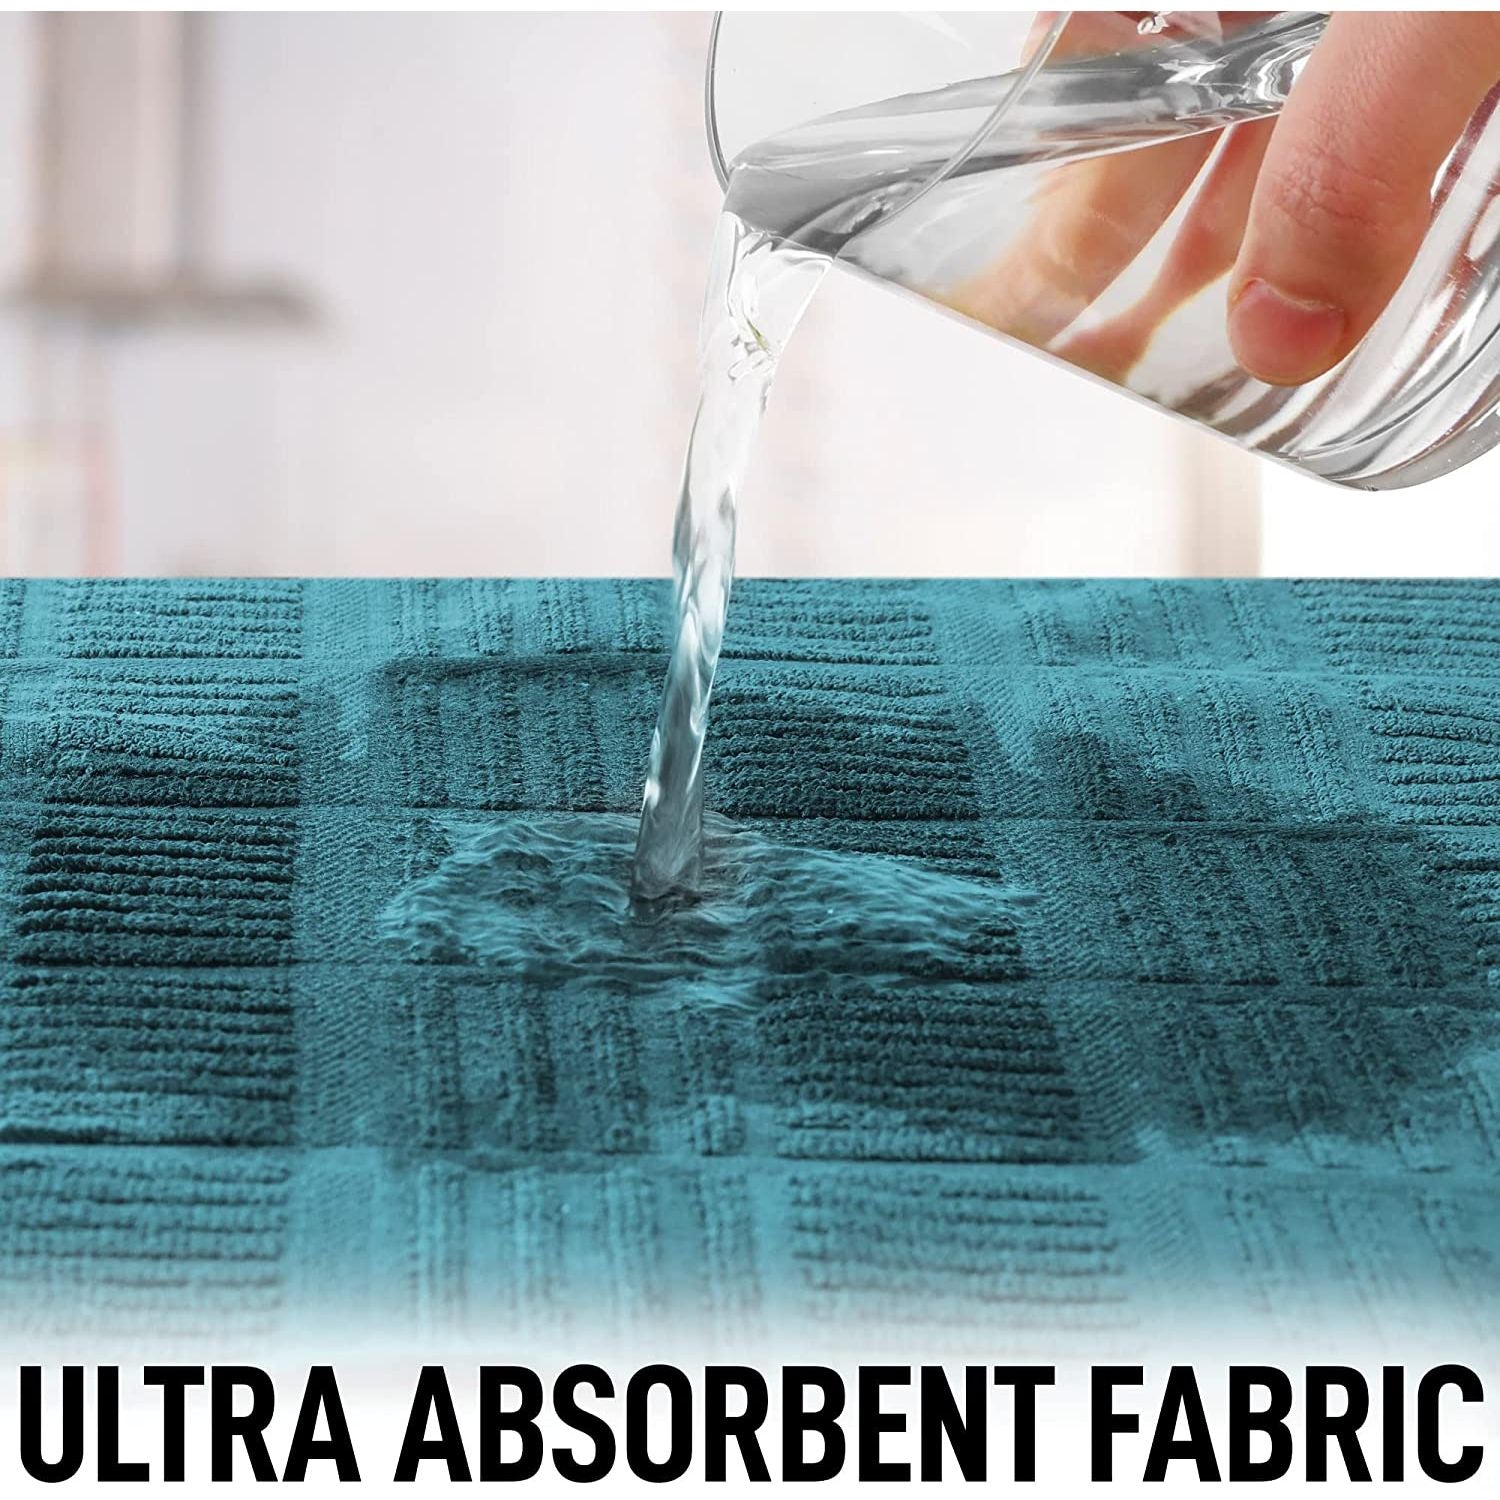 Ultra absorbent kitchen towels